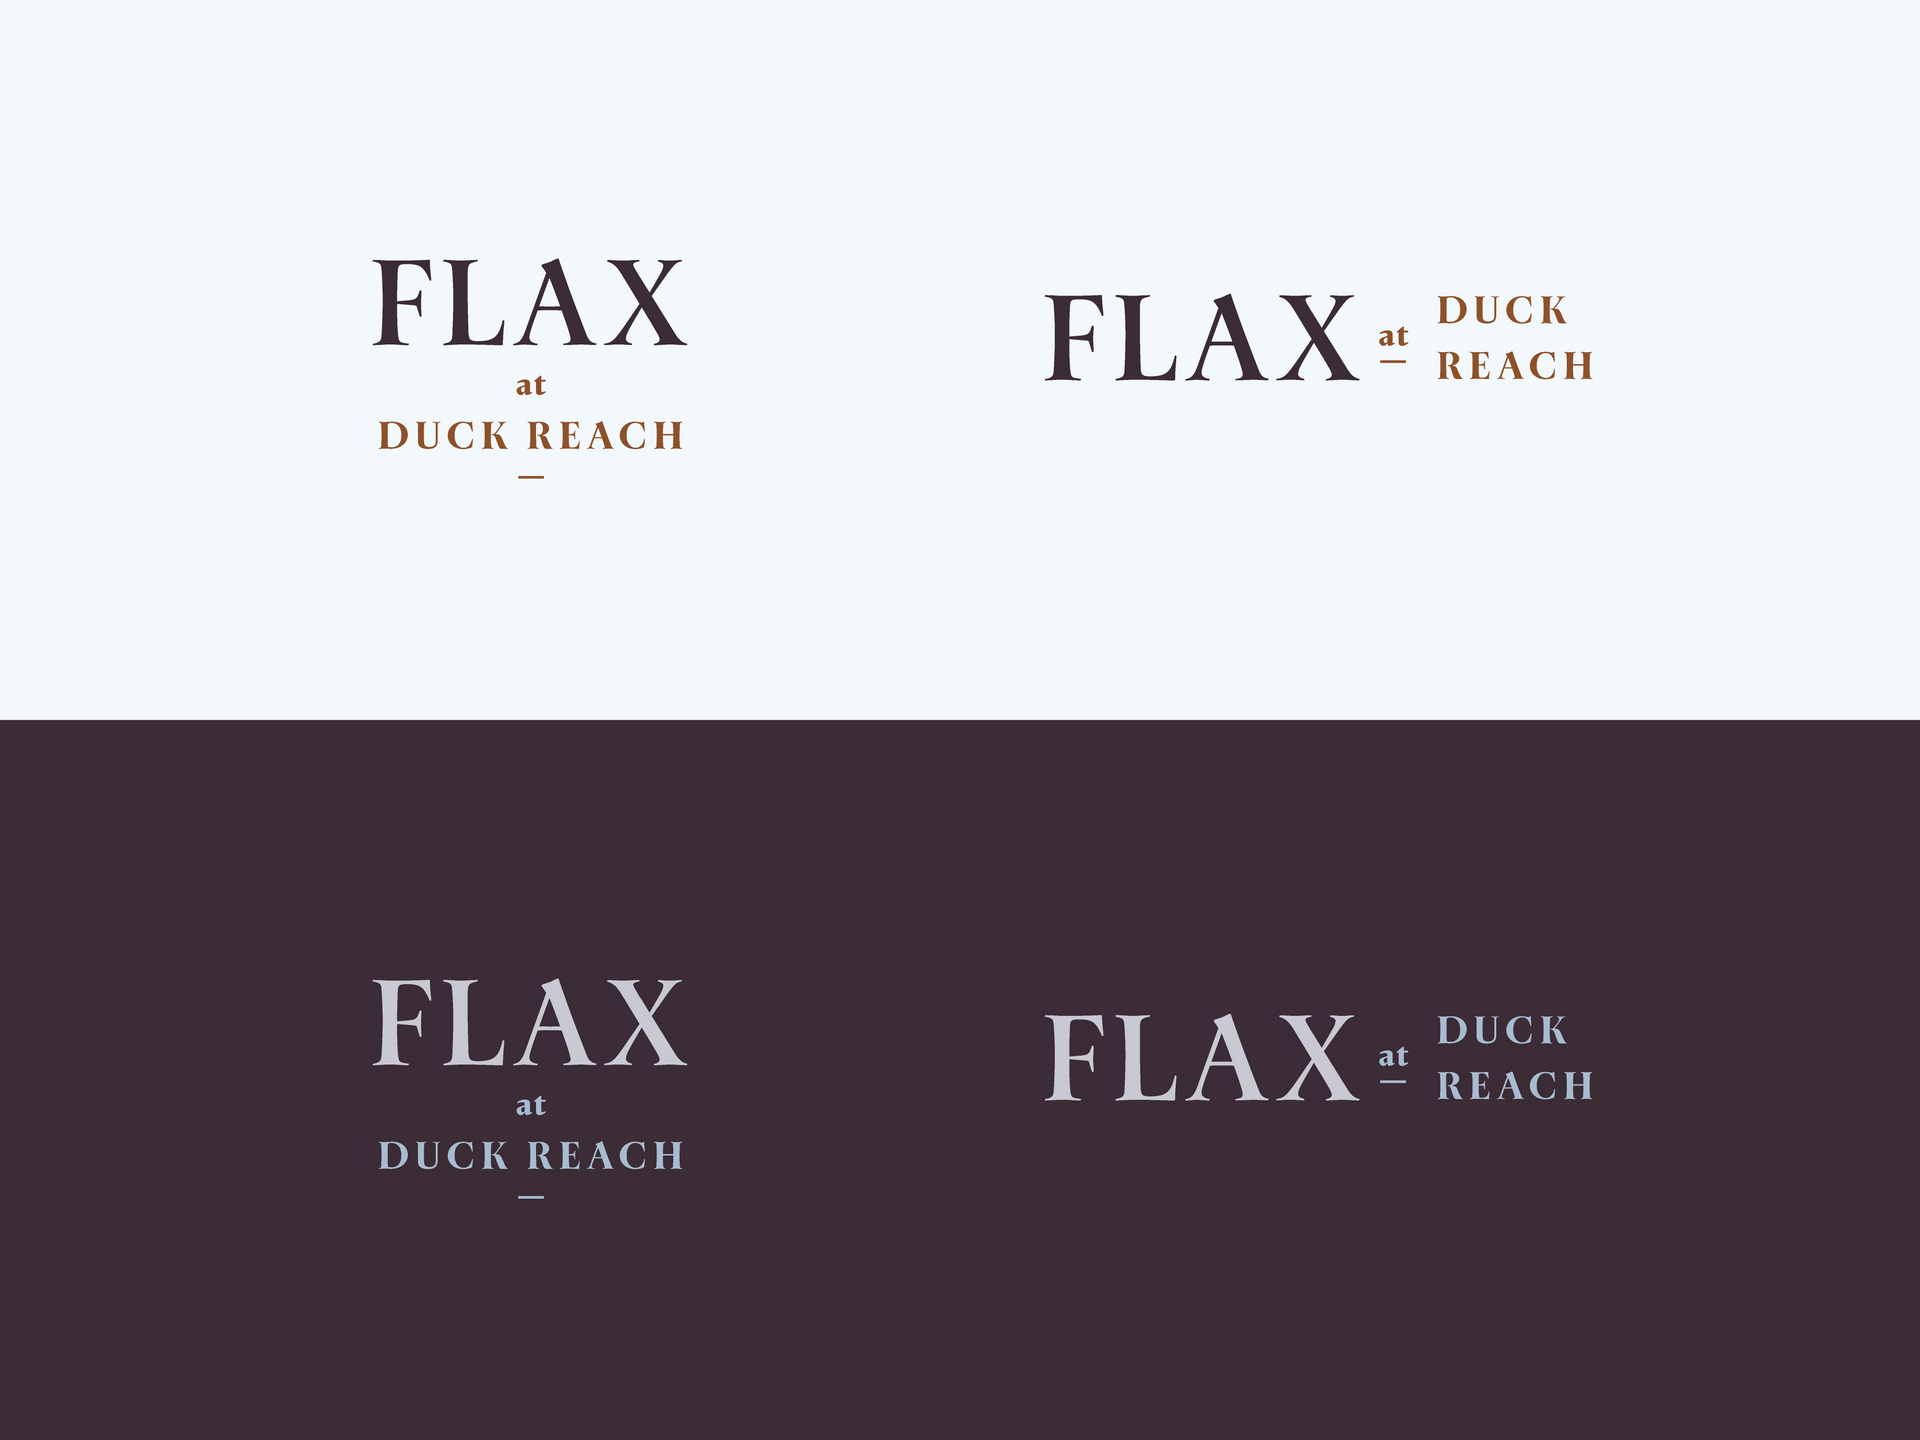 two different logos for flax at duck reach